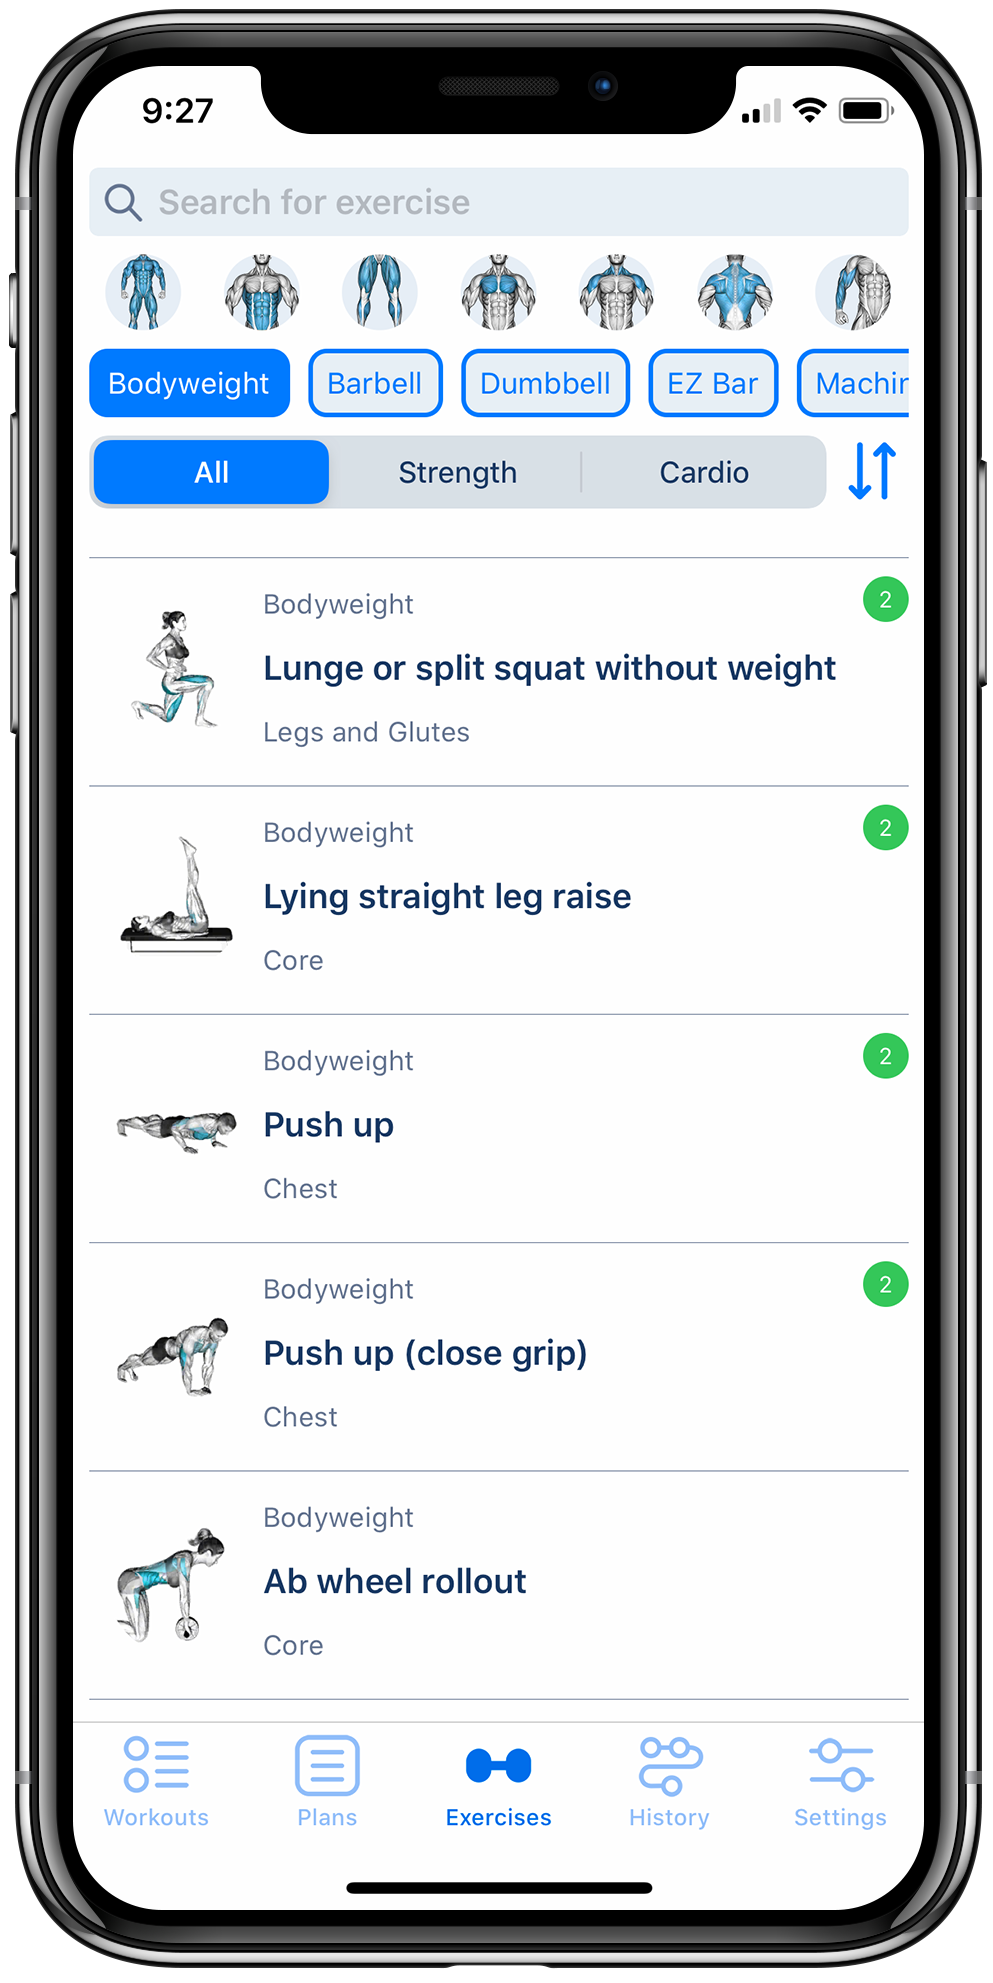 Workout tracker app on iPhone displaying a list of fitness exercises